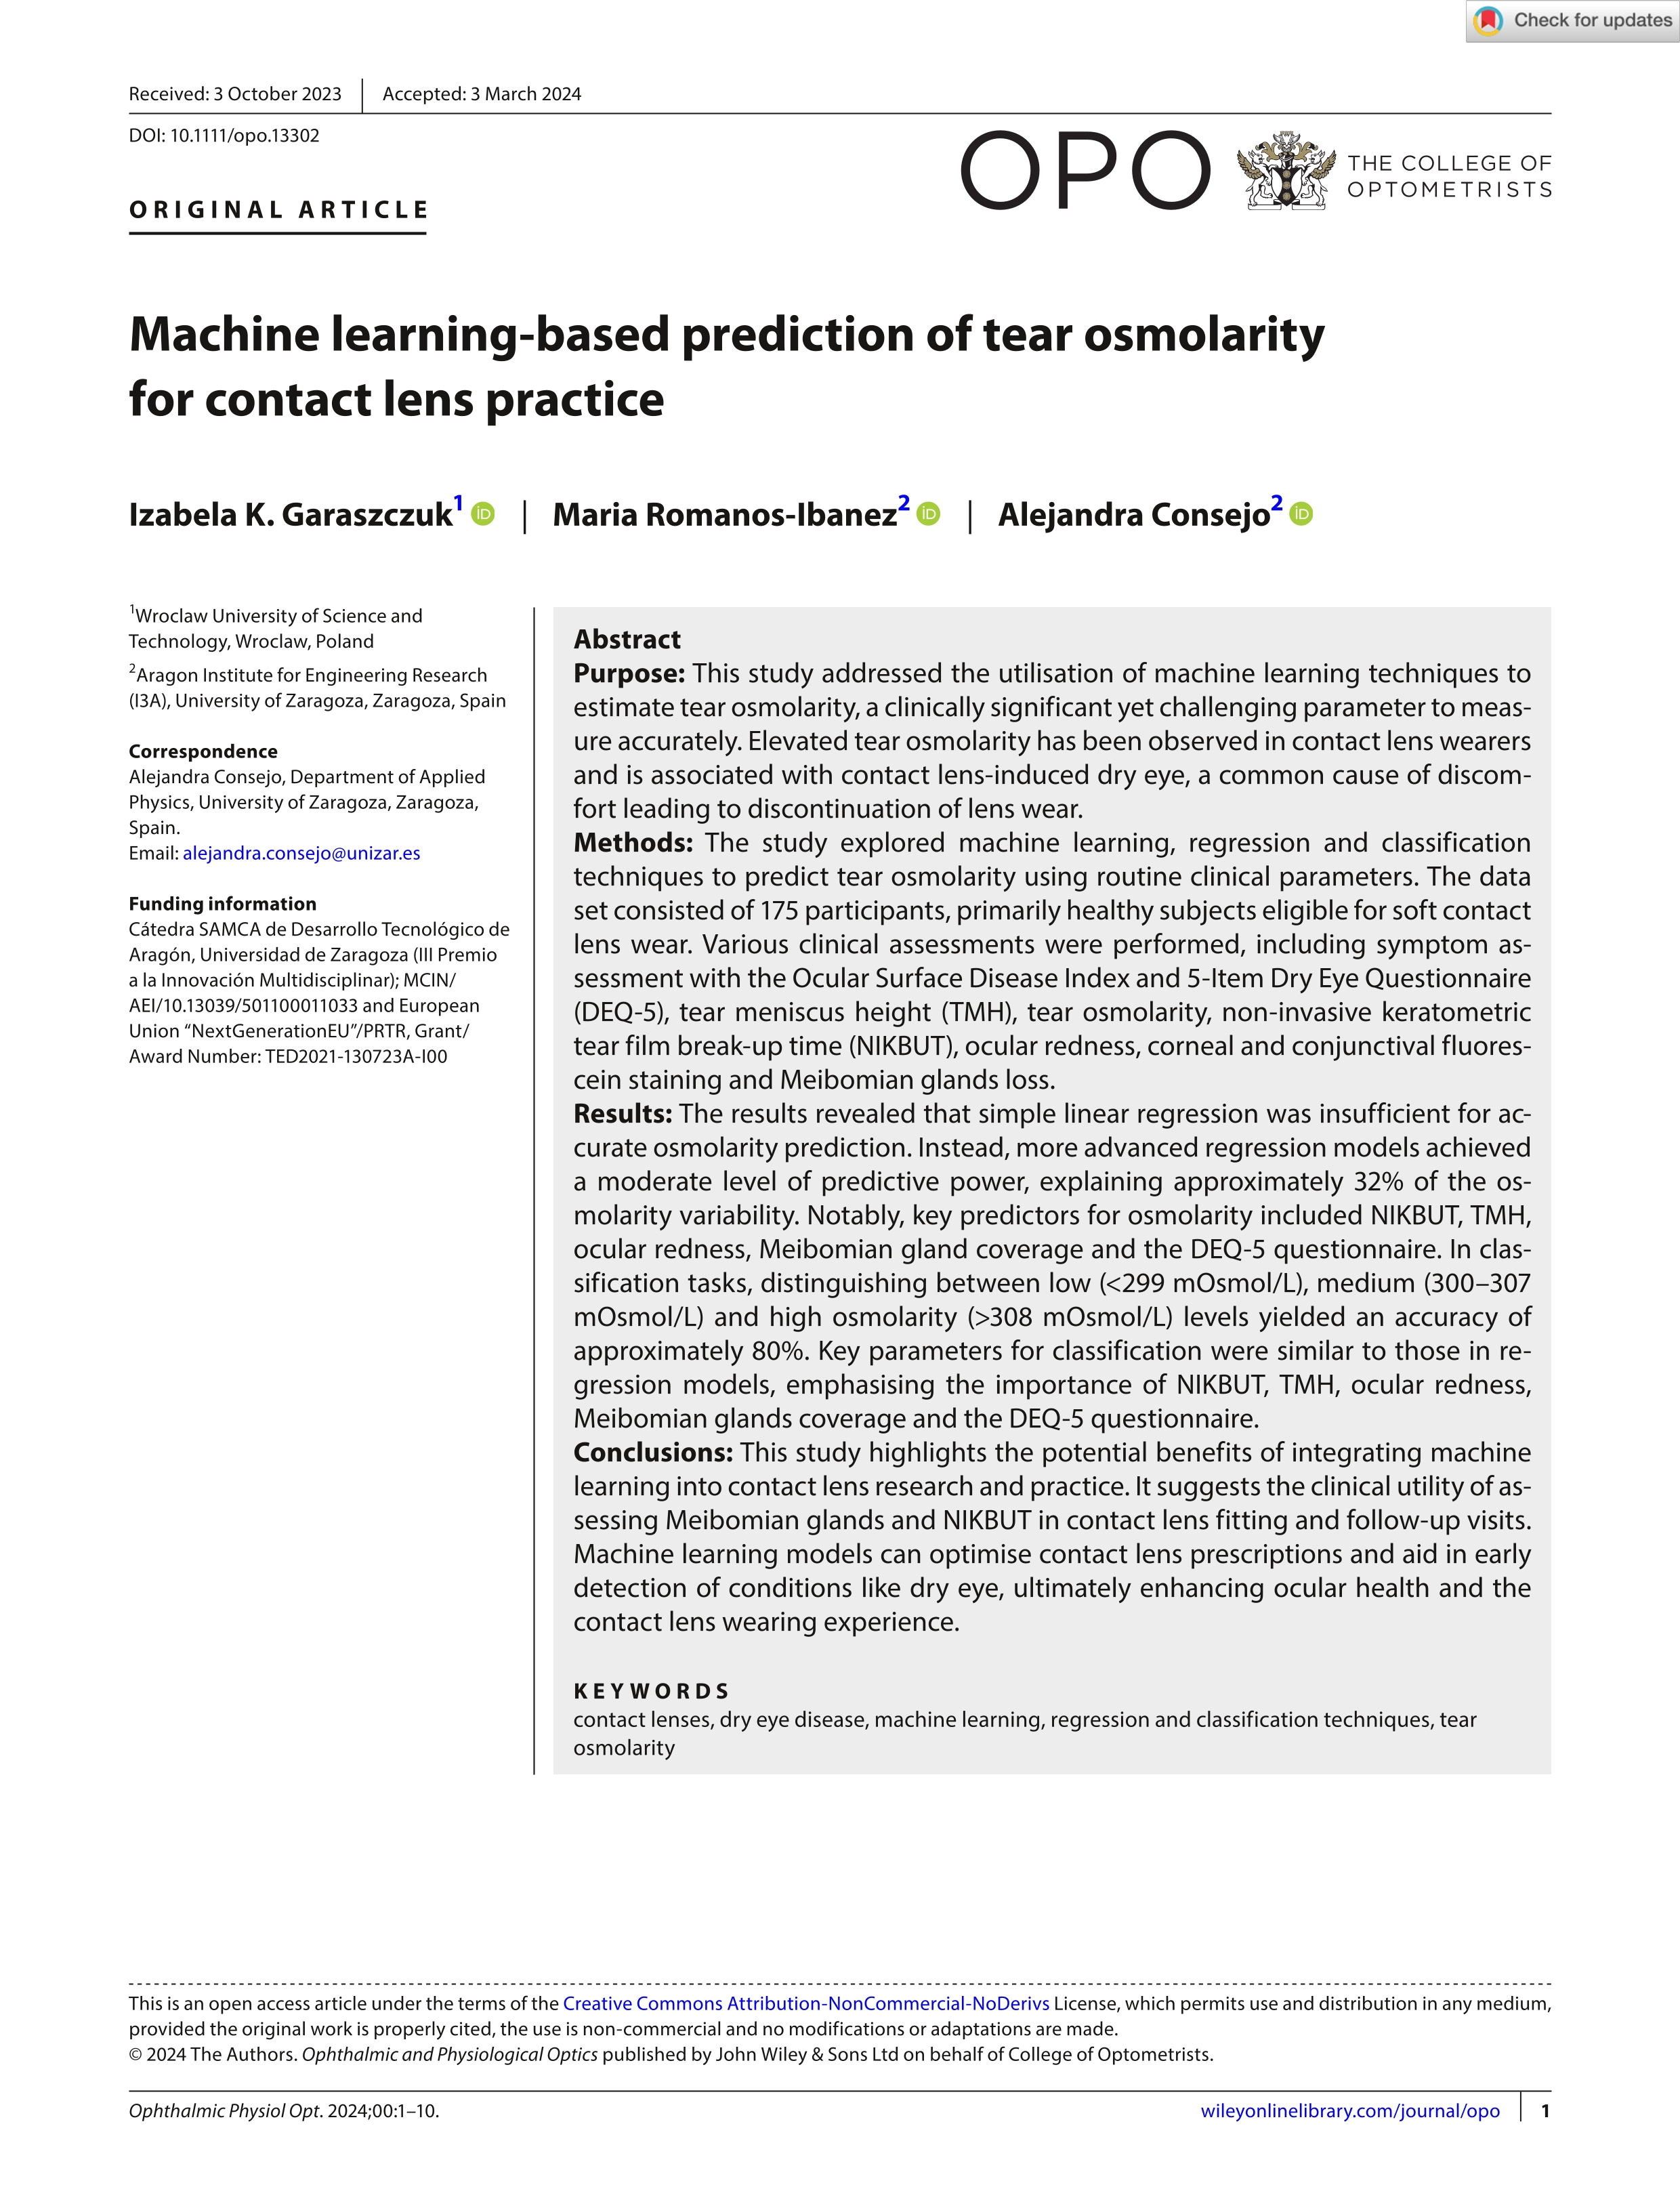 Machine learning-based prediction of tear osmolarity for contact lens practice